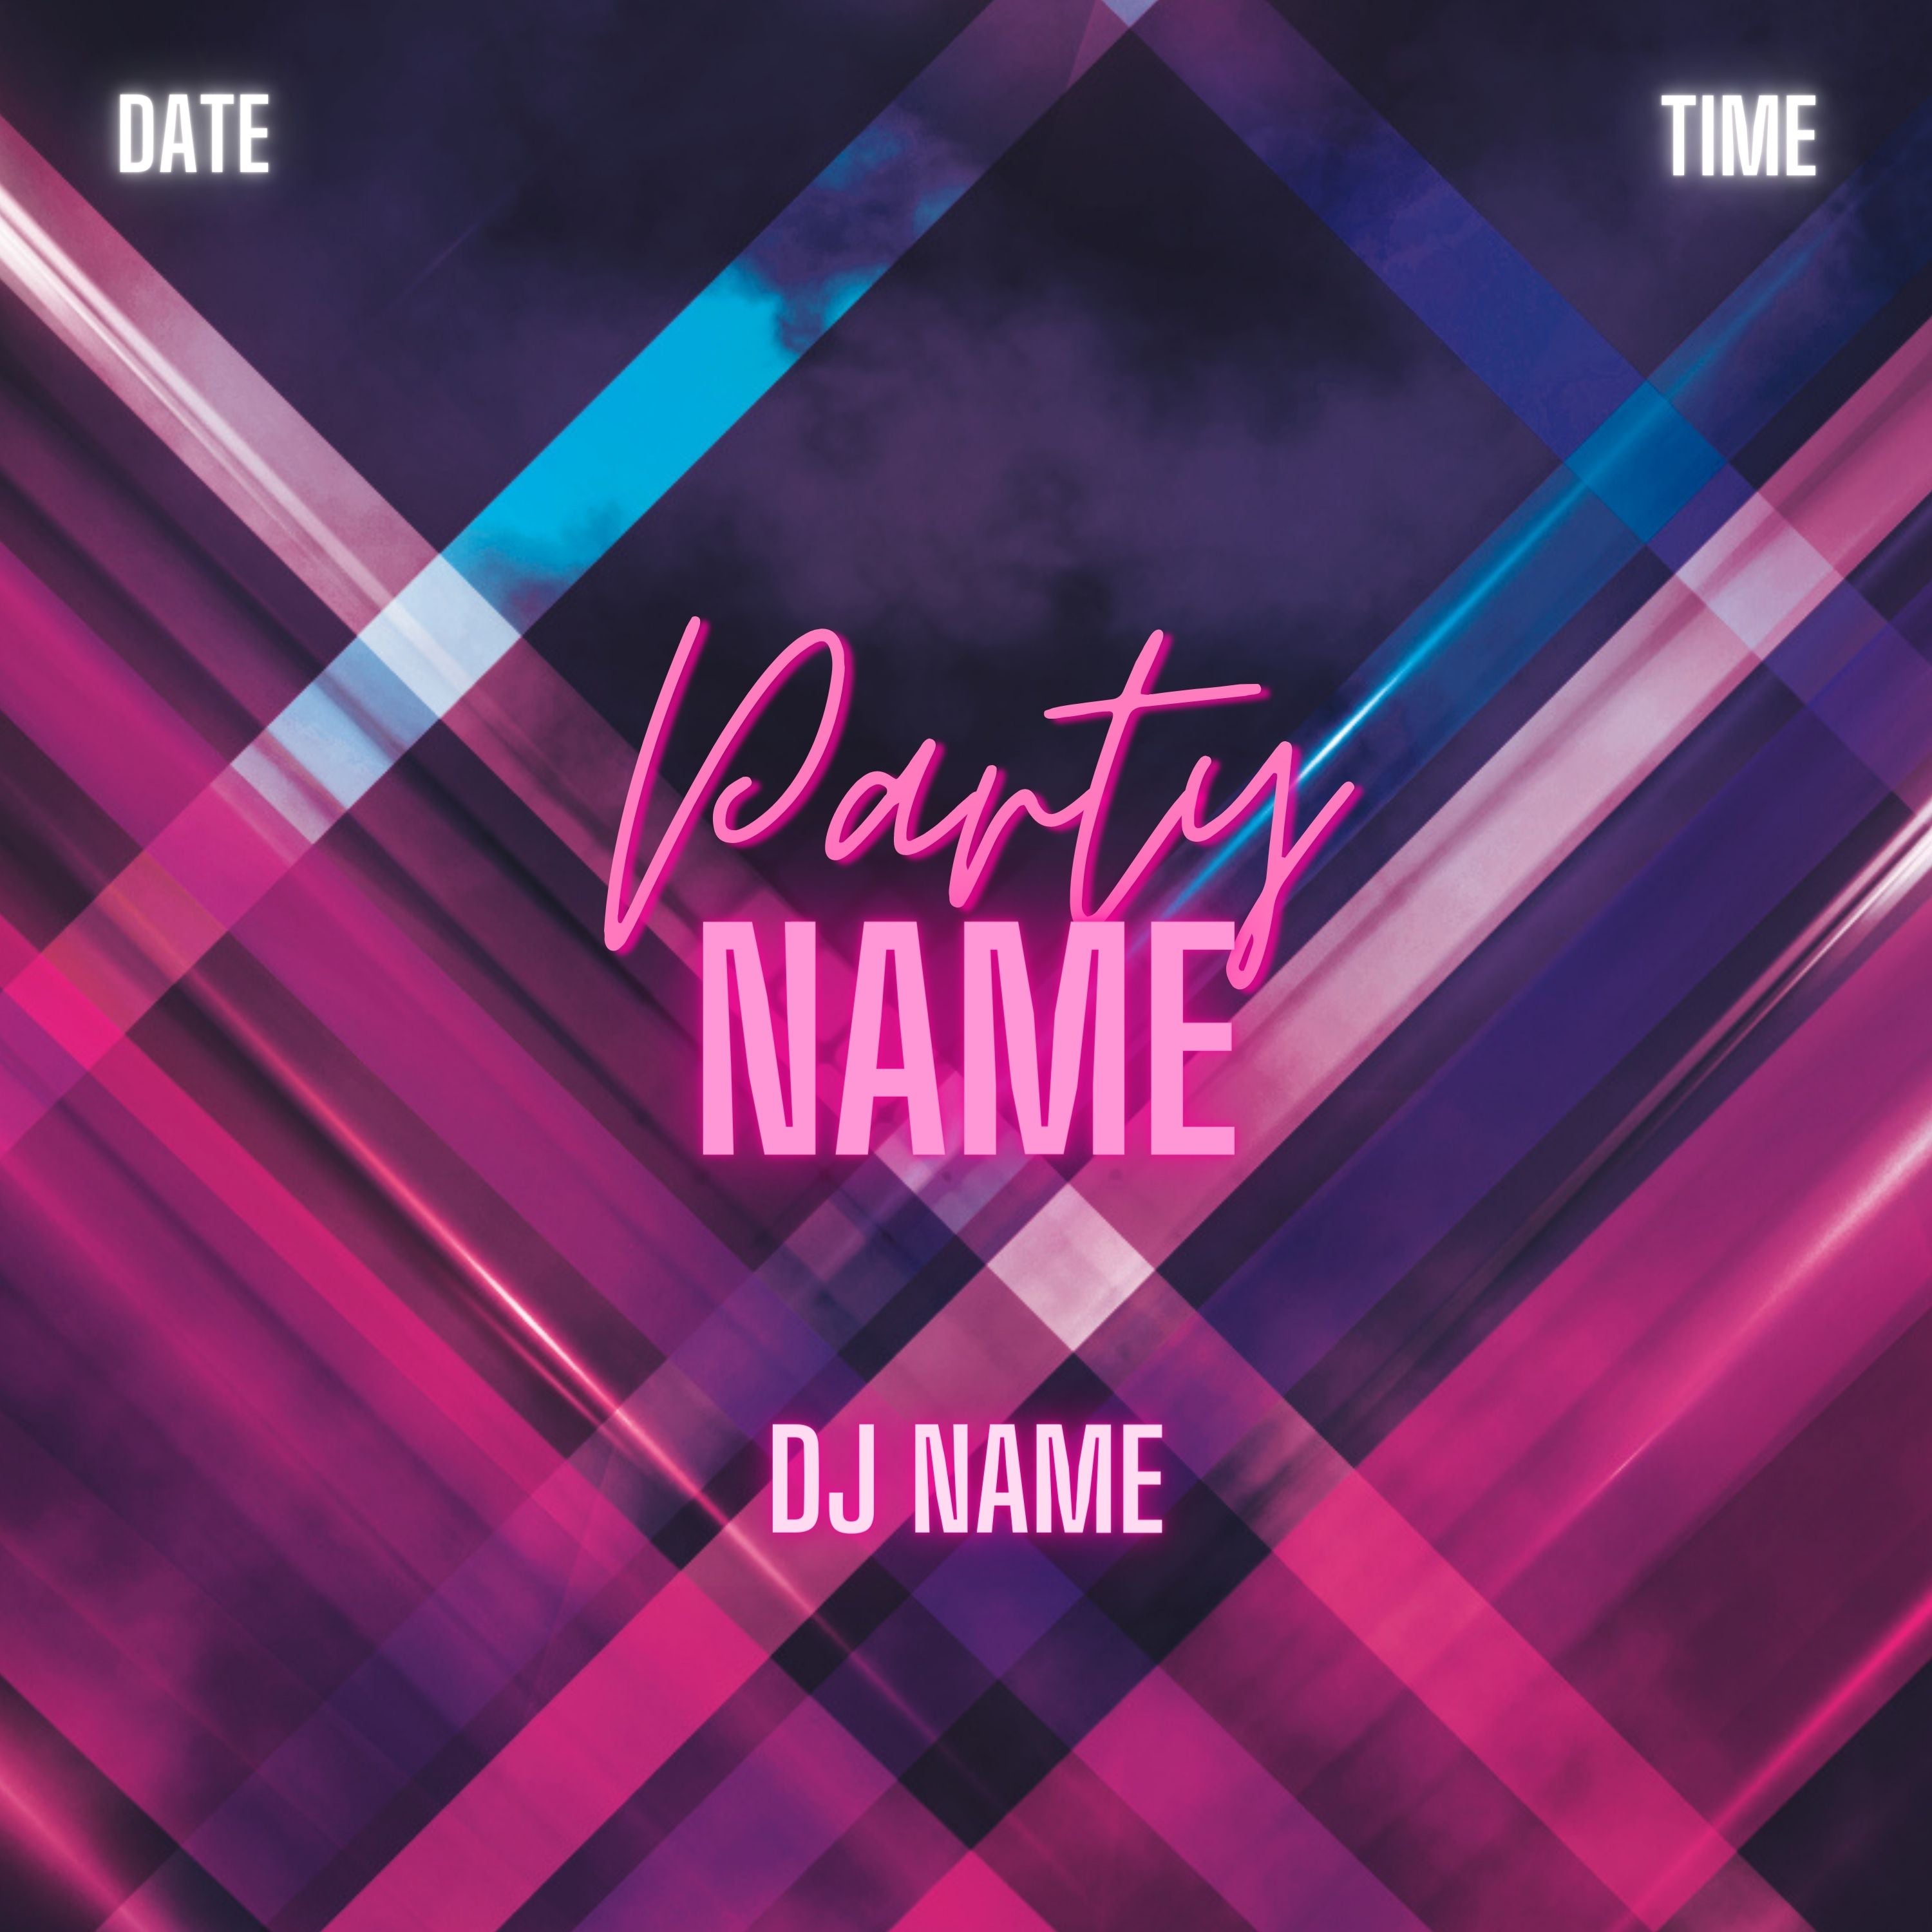 Party Time - Canva Template - Party Flyer - DJ Flyer - Night Club Flyer